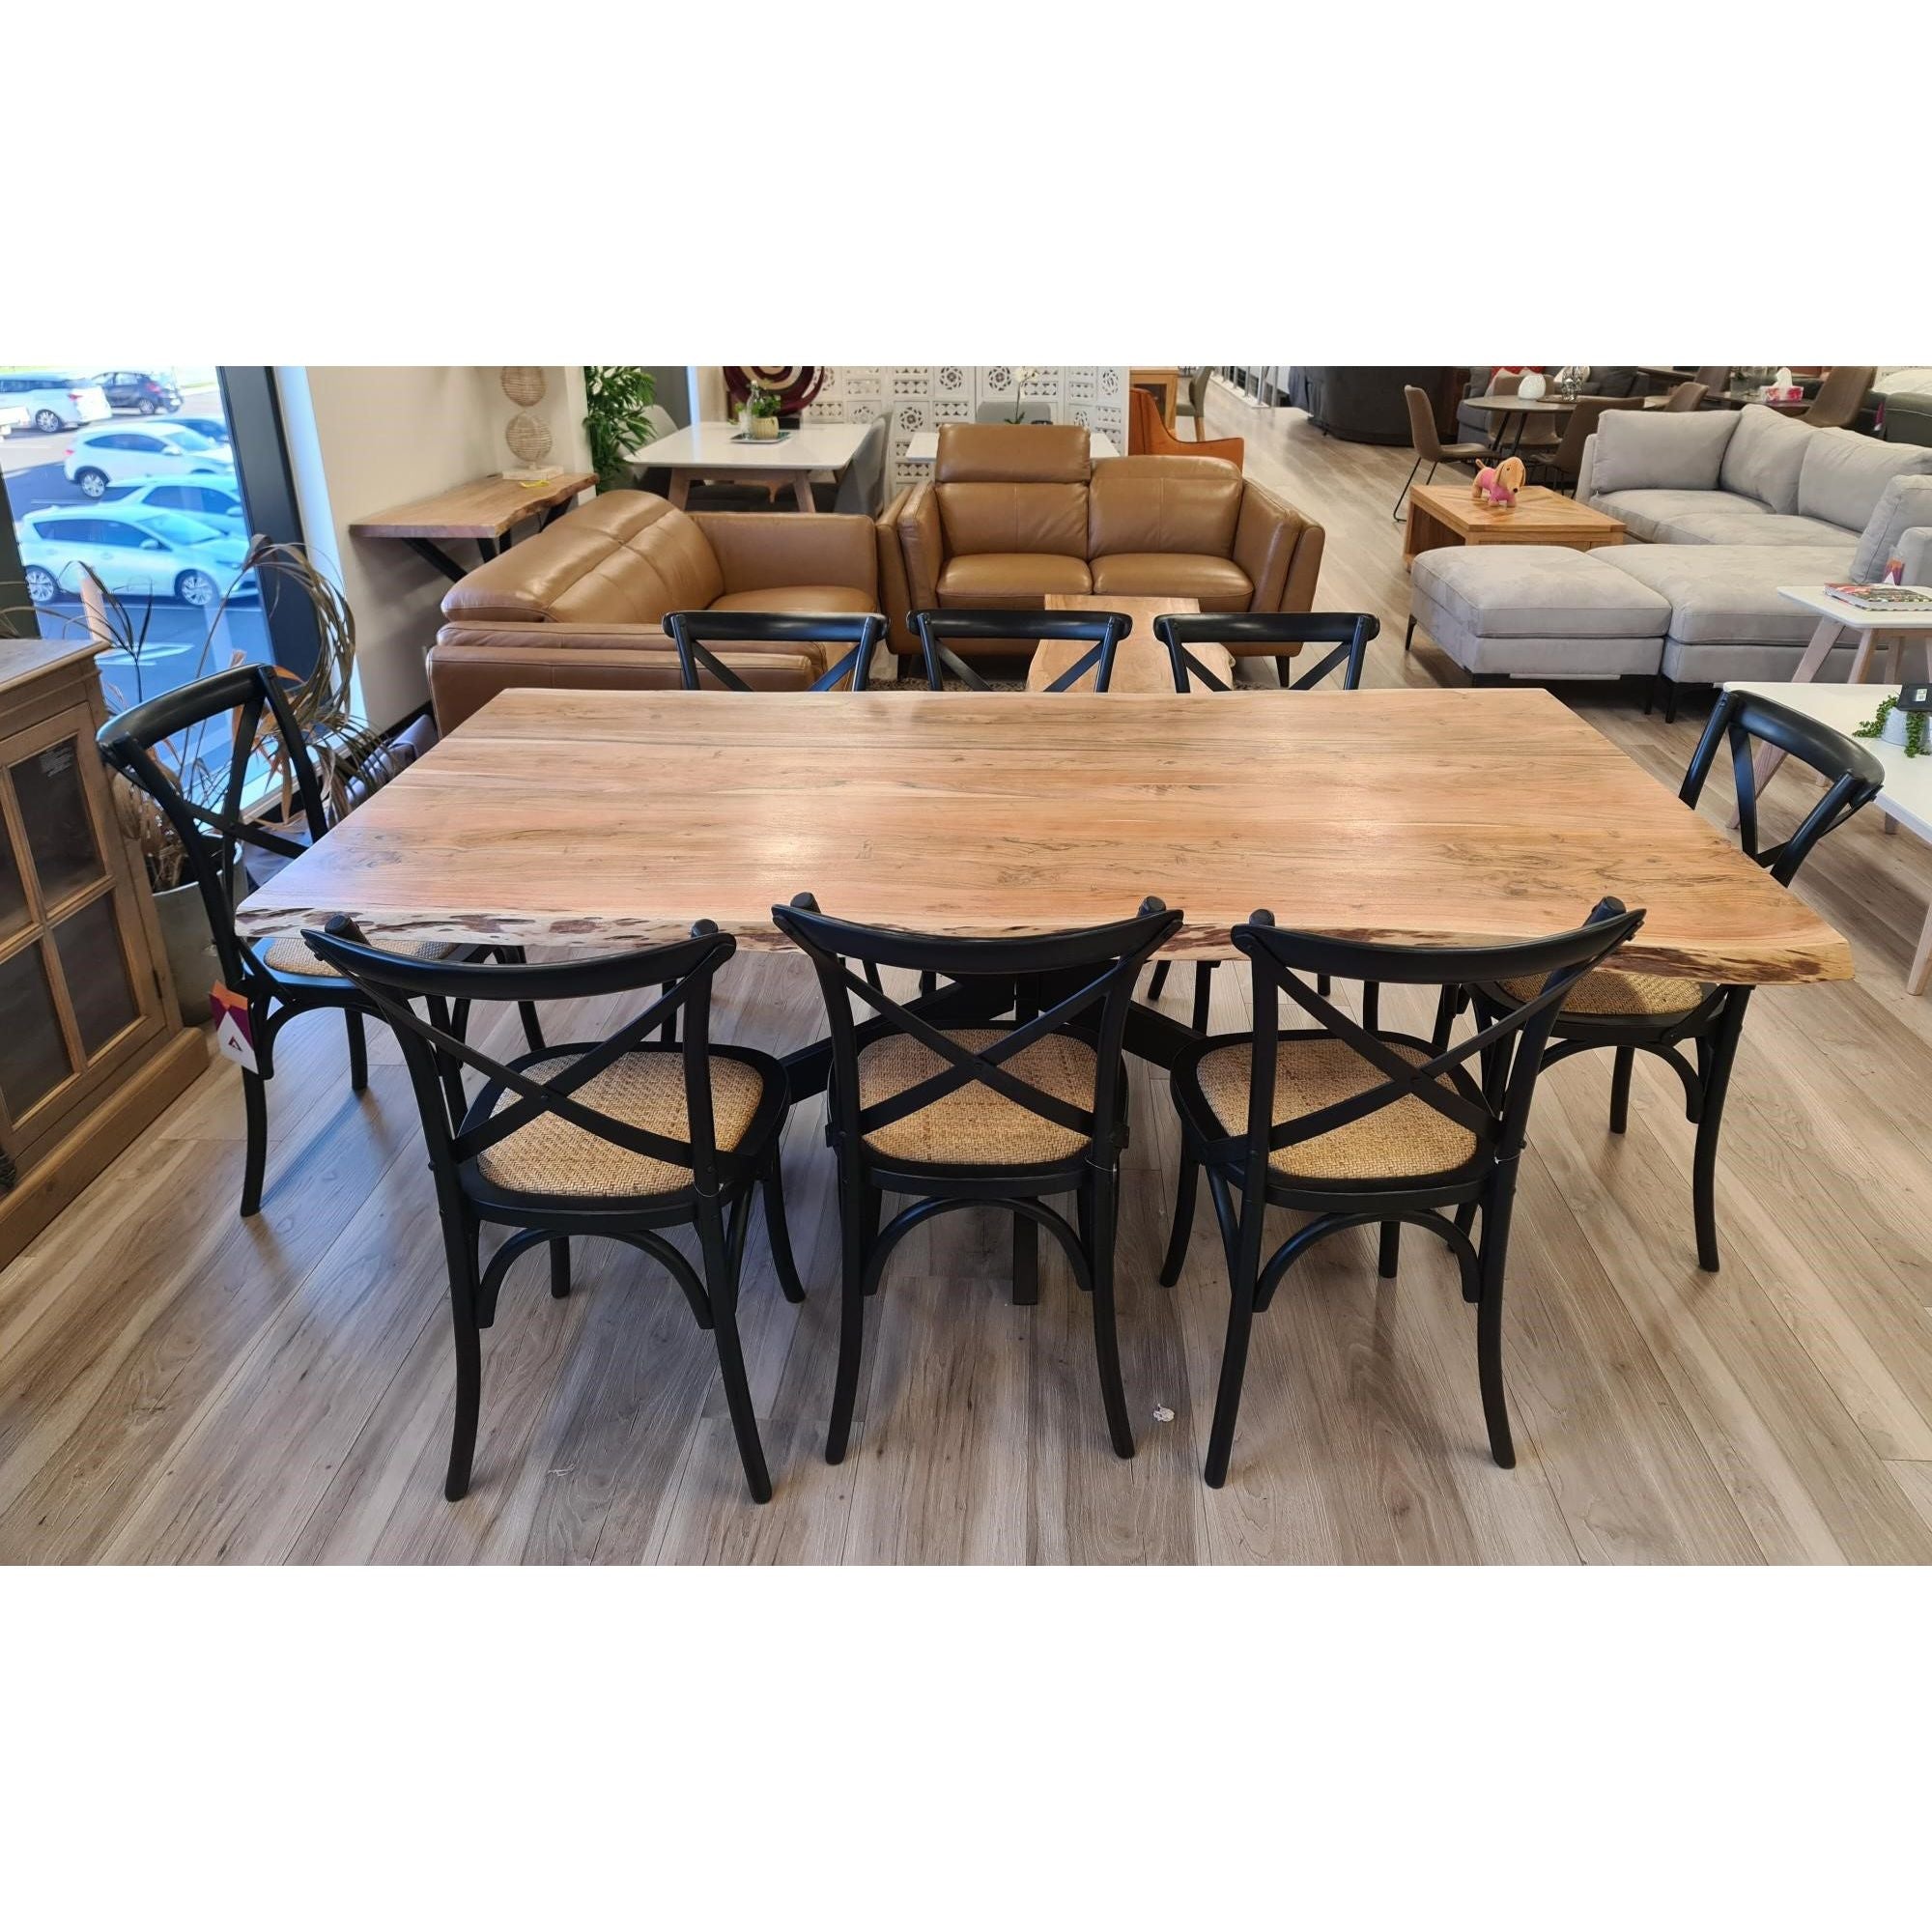 Solid polished wood and metal framed Acacia eight seat dining table and chair 